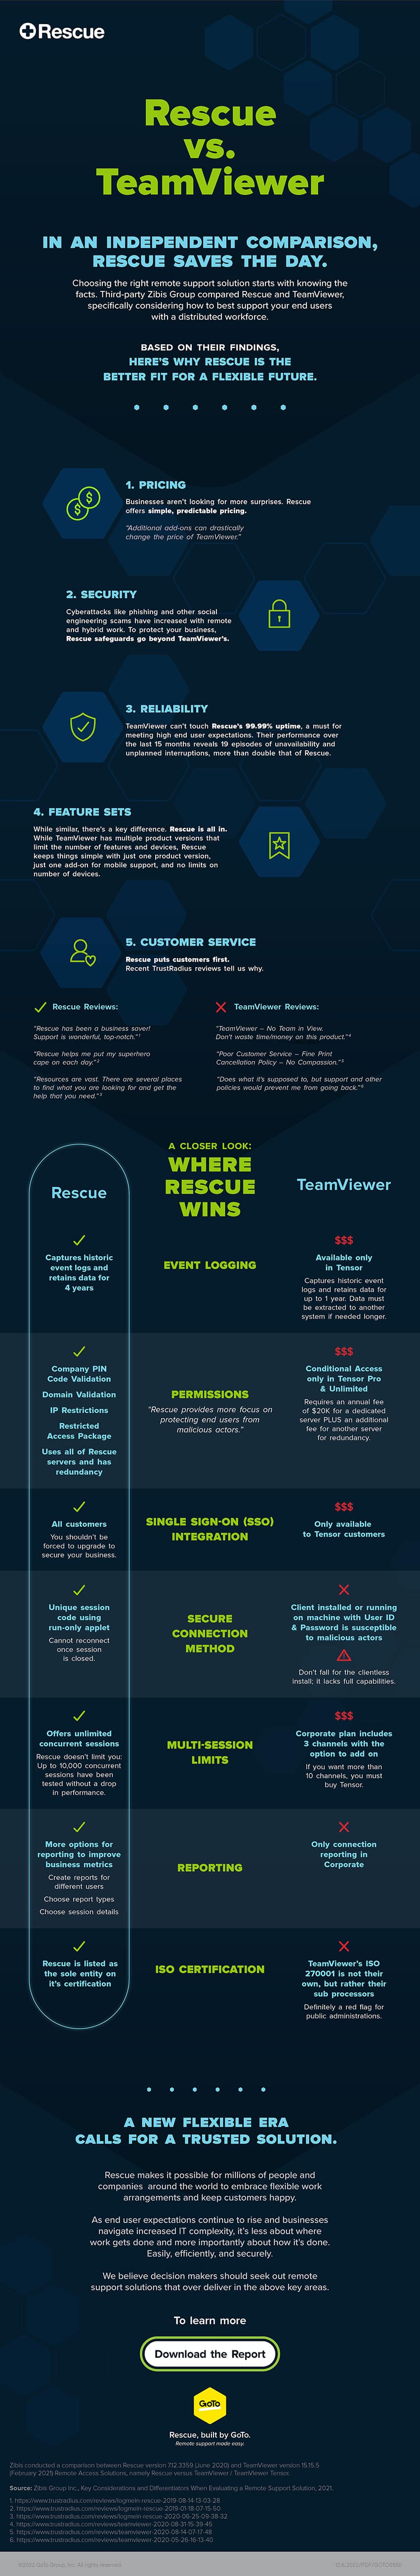 Large infographic comparing Rescue to TeamViewer. Click to open pdf.